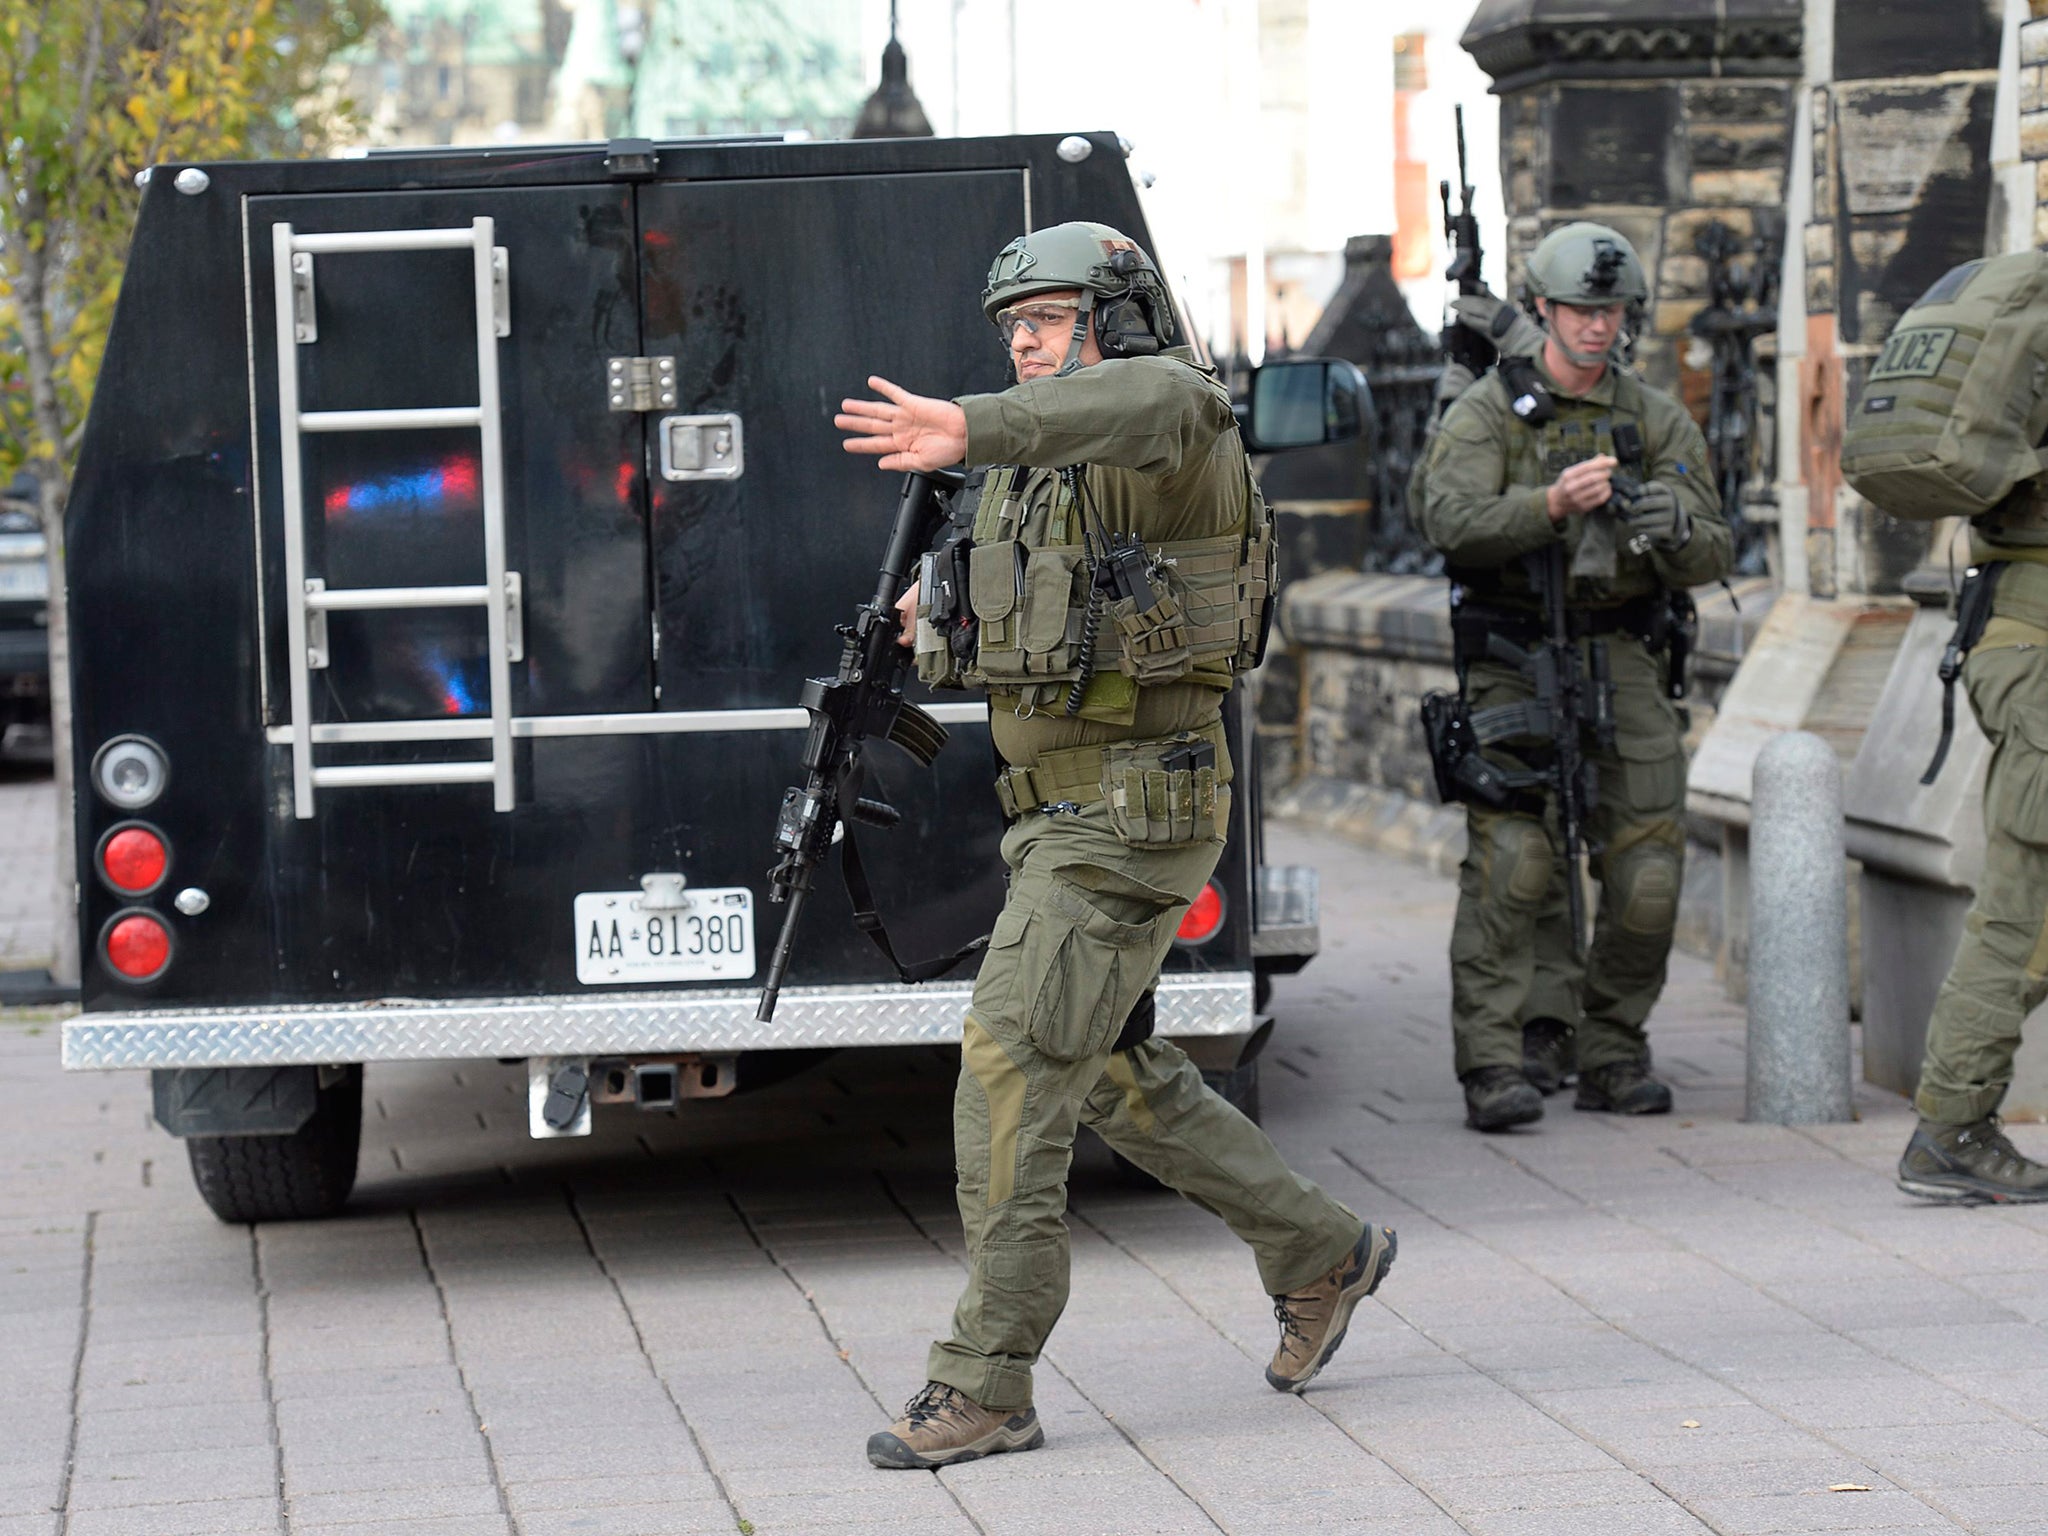 RCMP intervention team members clear the area at the entrance of Parliament hill in Ottawa